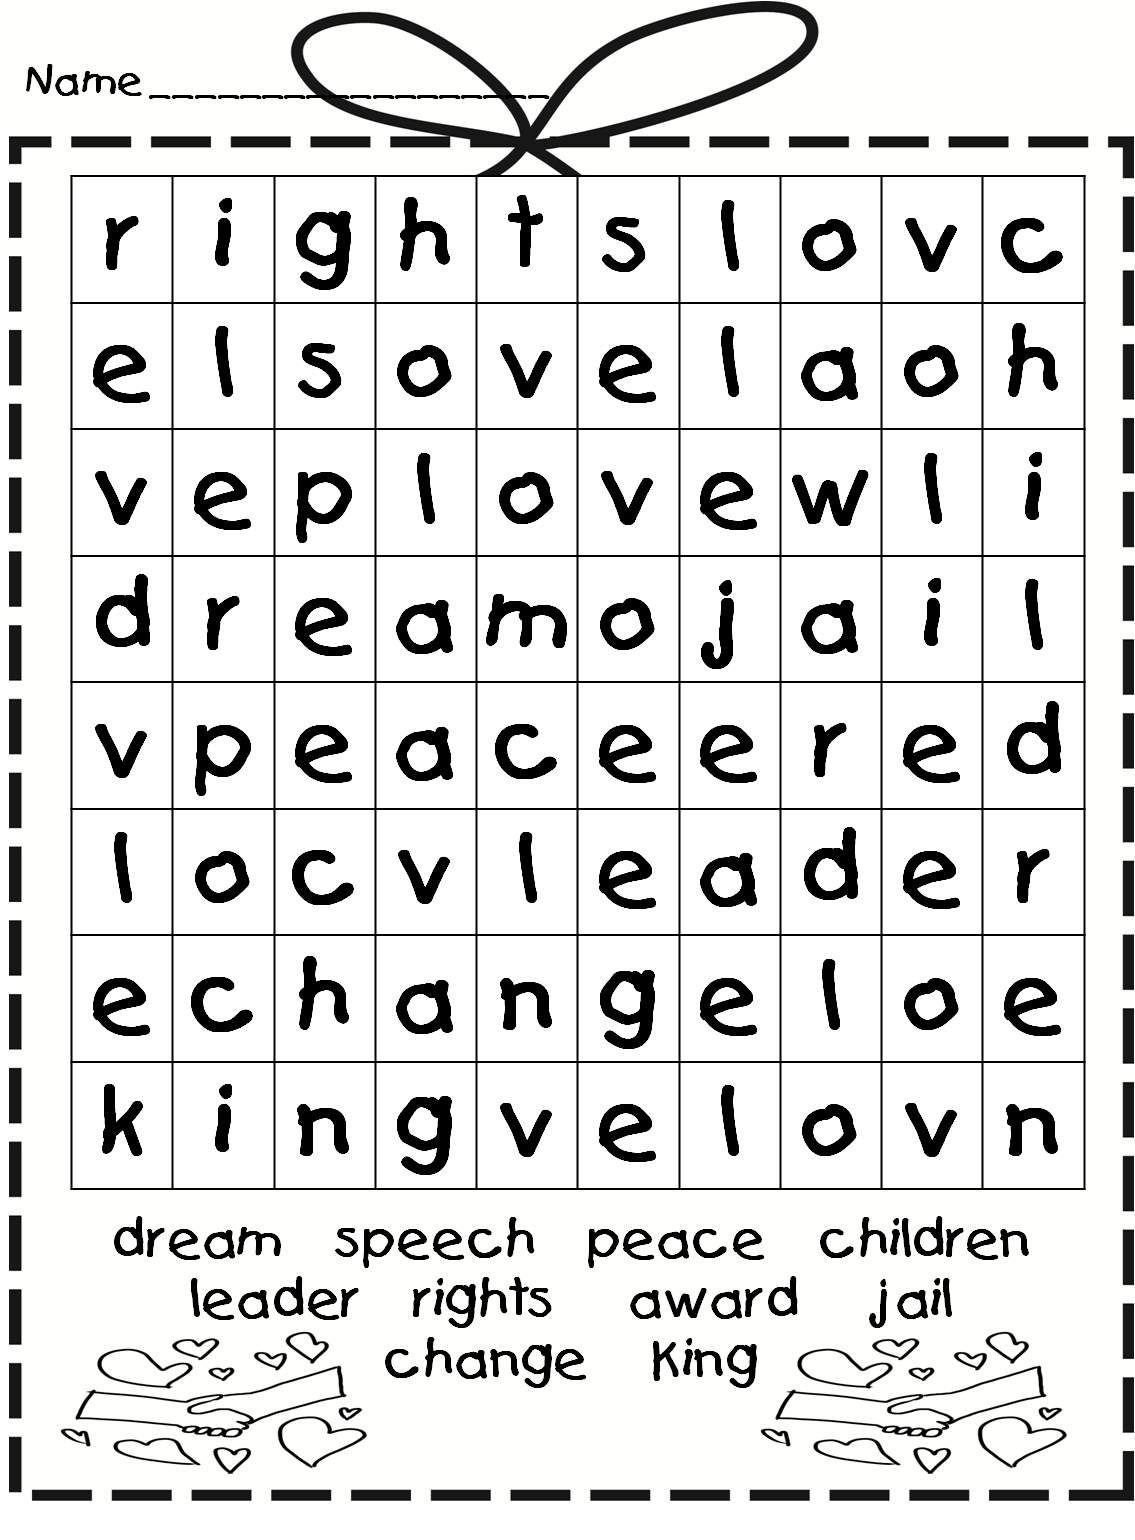 sight with first dictionary printable words darkgem.com/145 word dictionary  printable.html sight grade